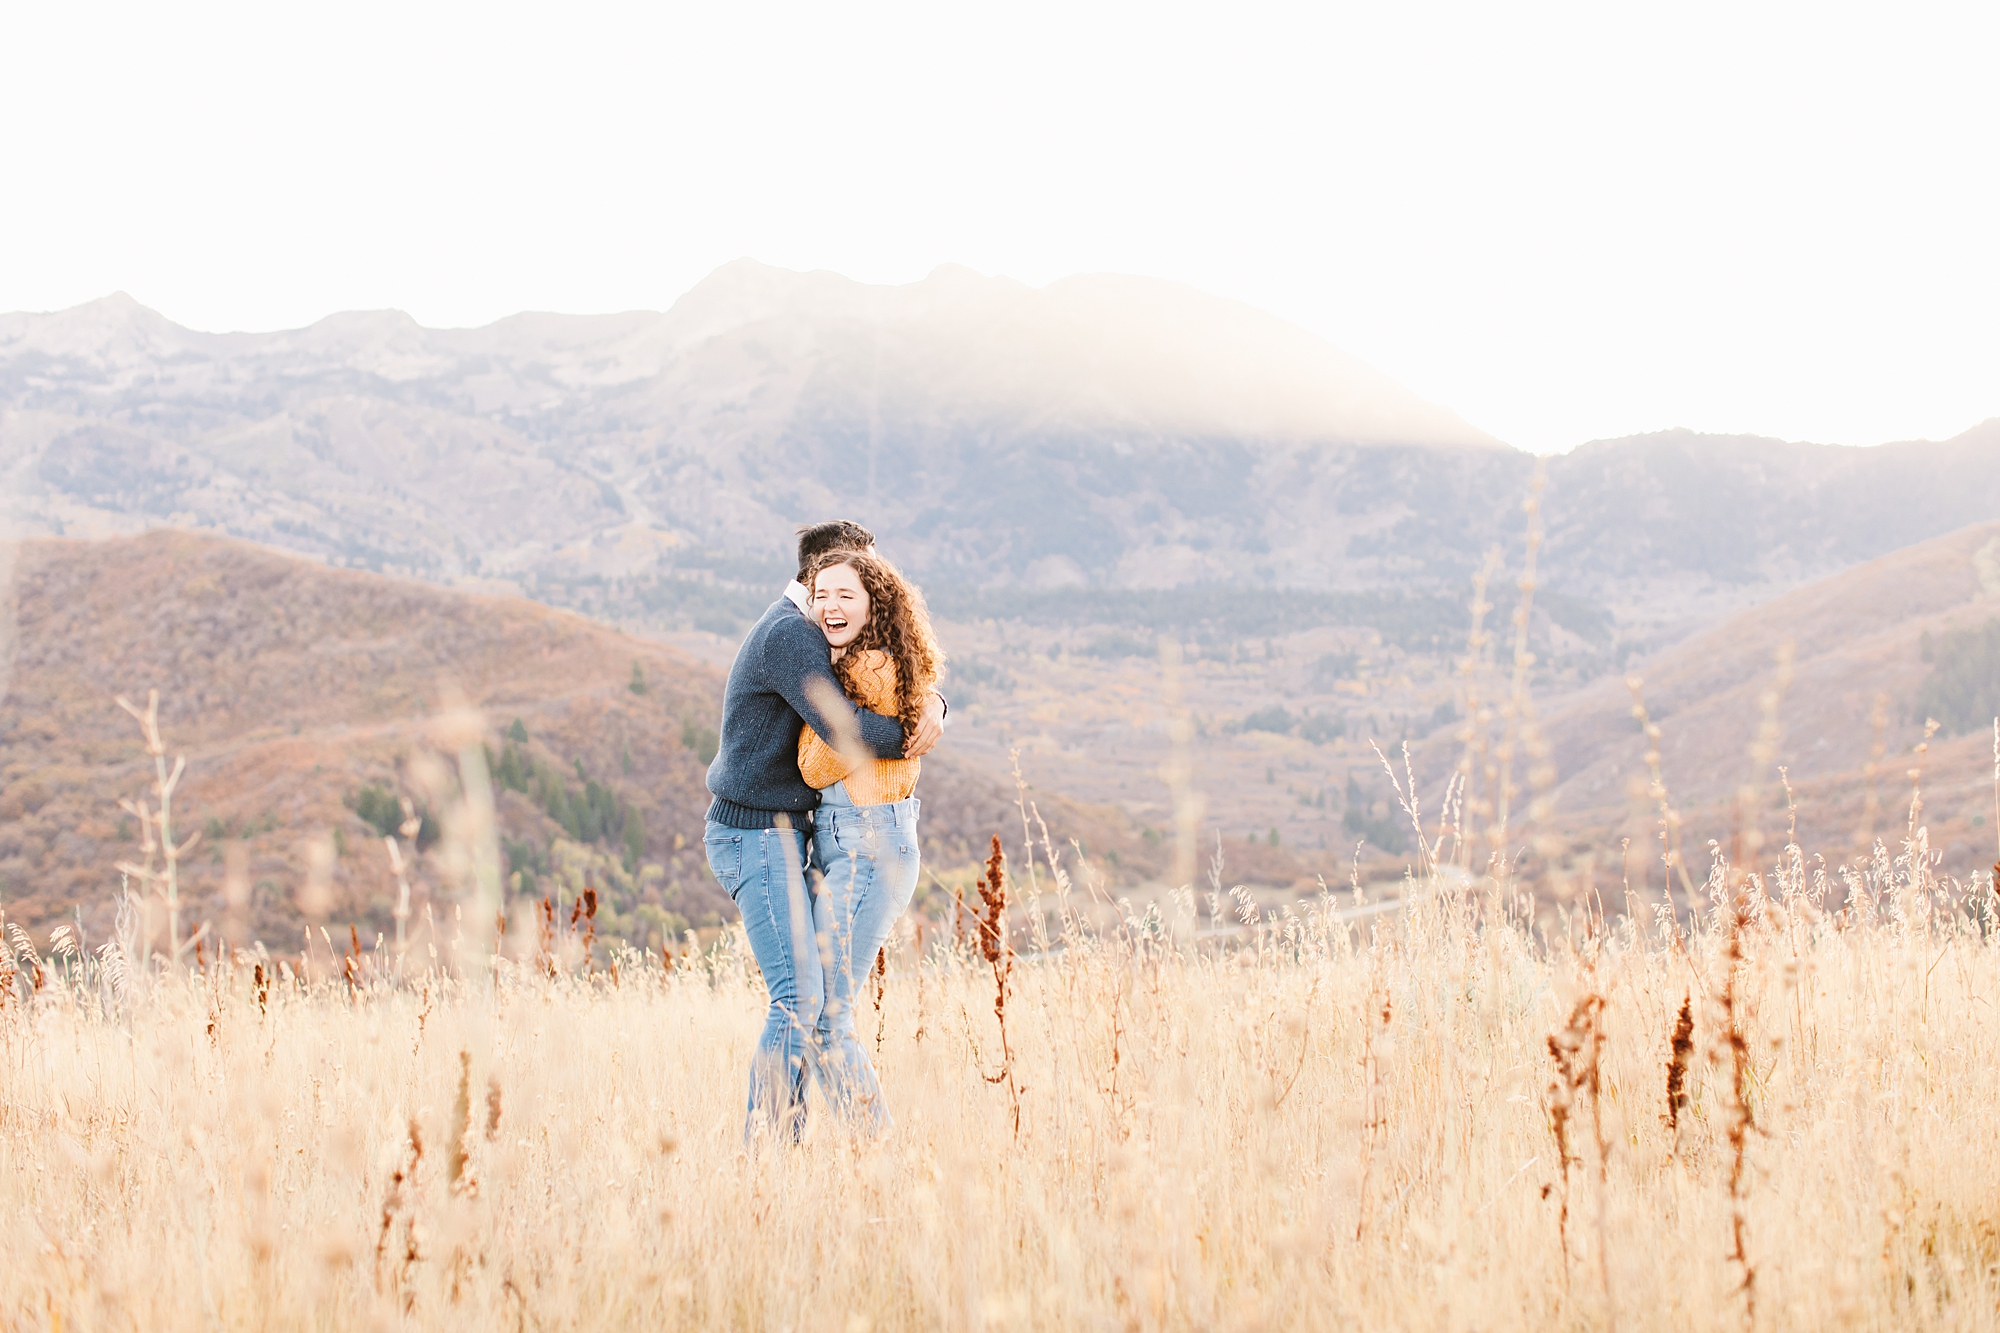 Finding a Utah Engagement Photographer to capture your proposal